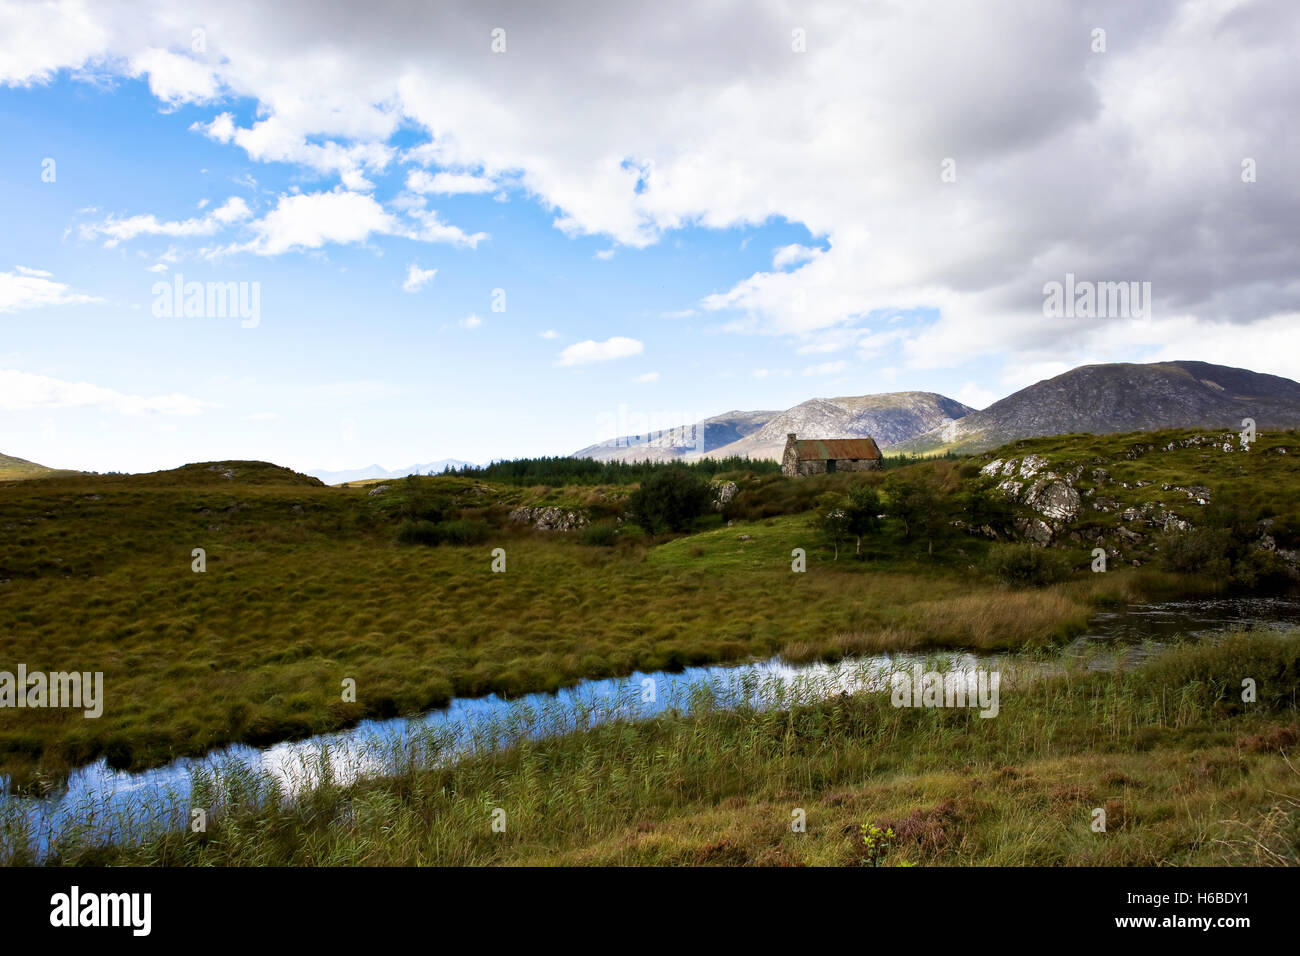 Scenic landscape of mountains and lakes in connemara ireland Stock Photo